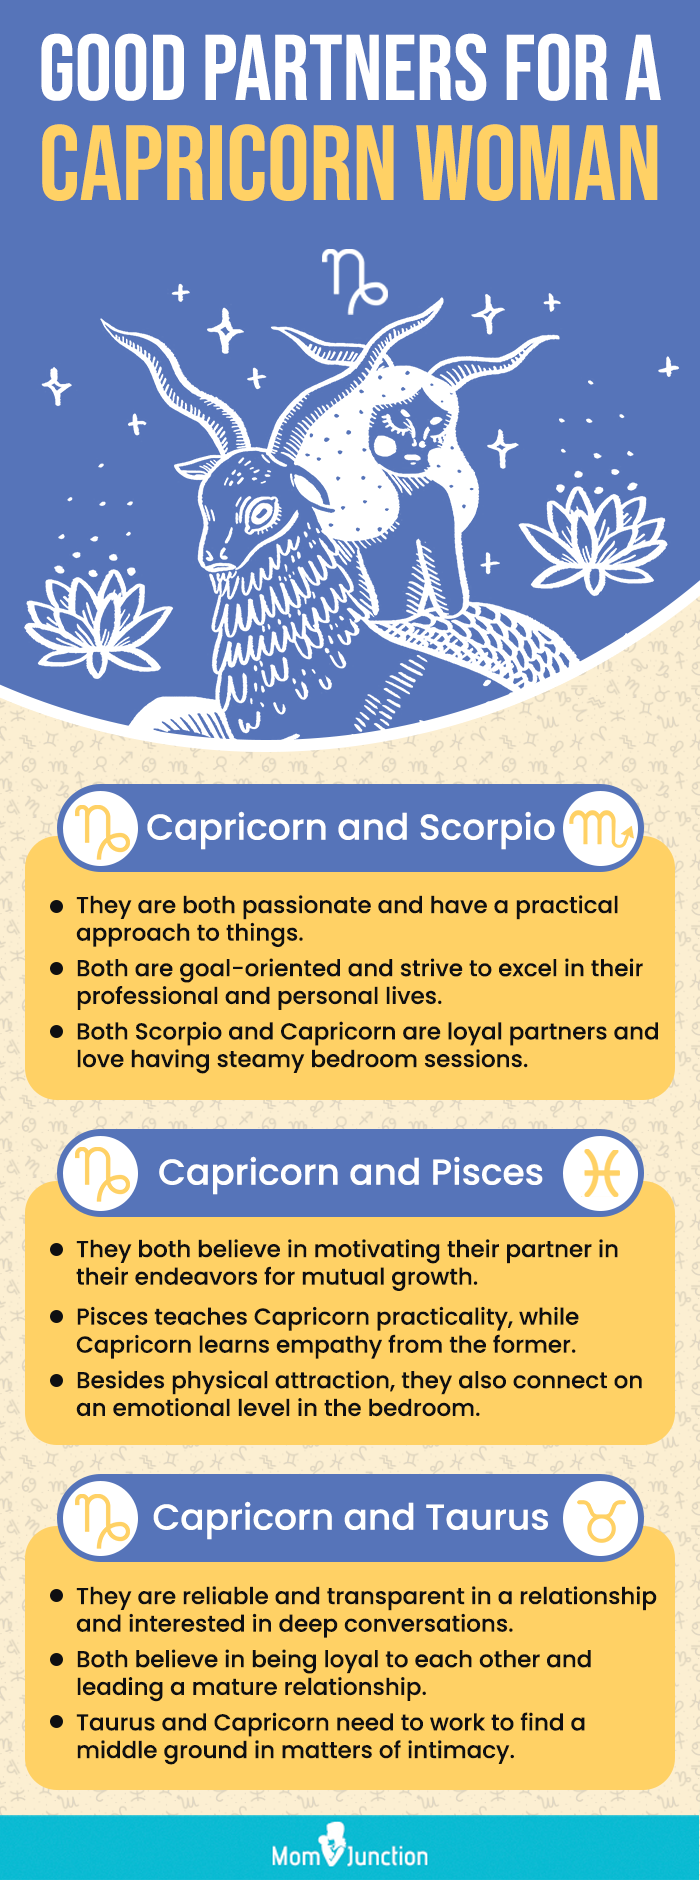 good partners for a capricon woman (infographic)